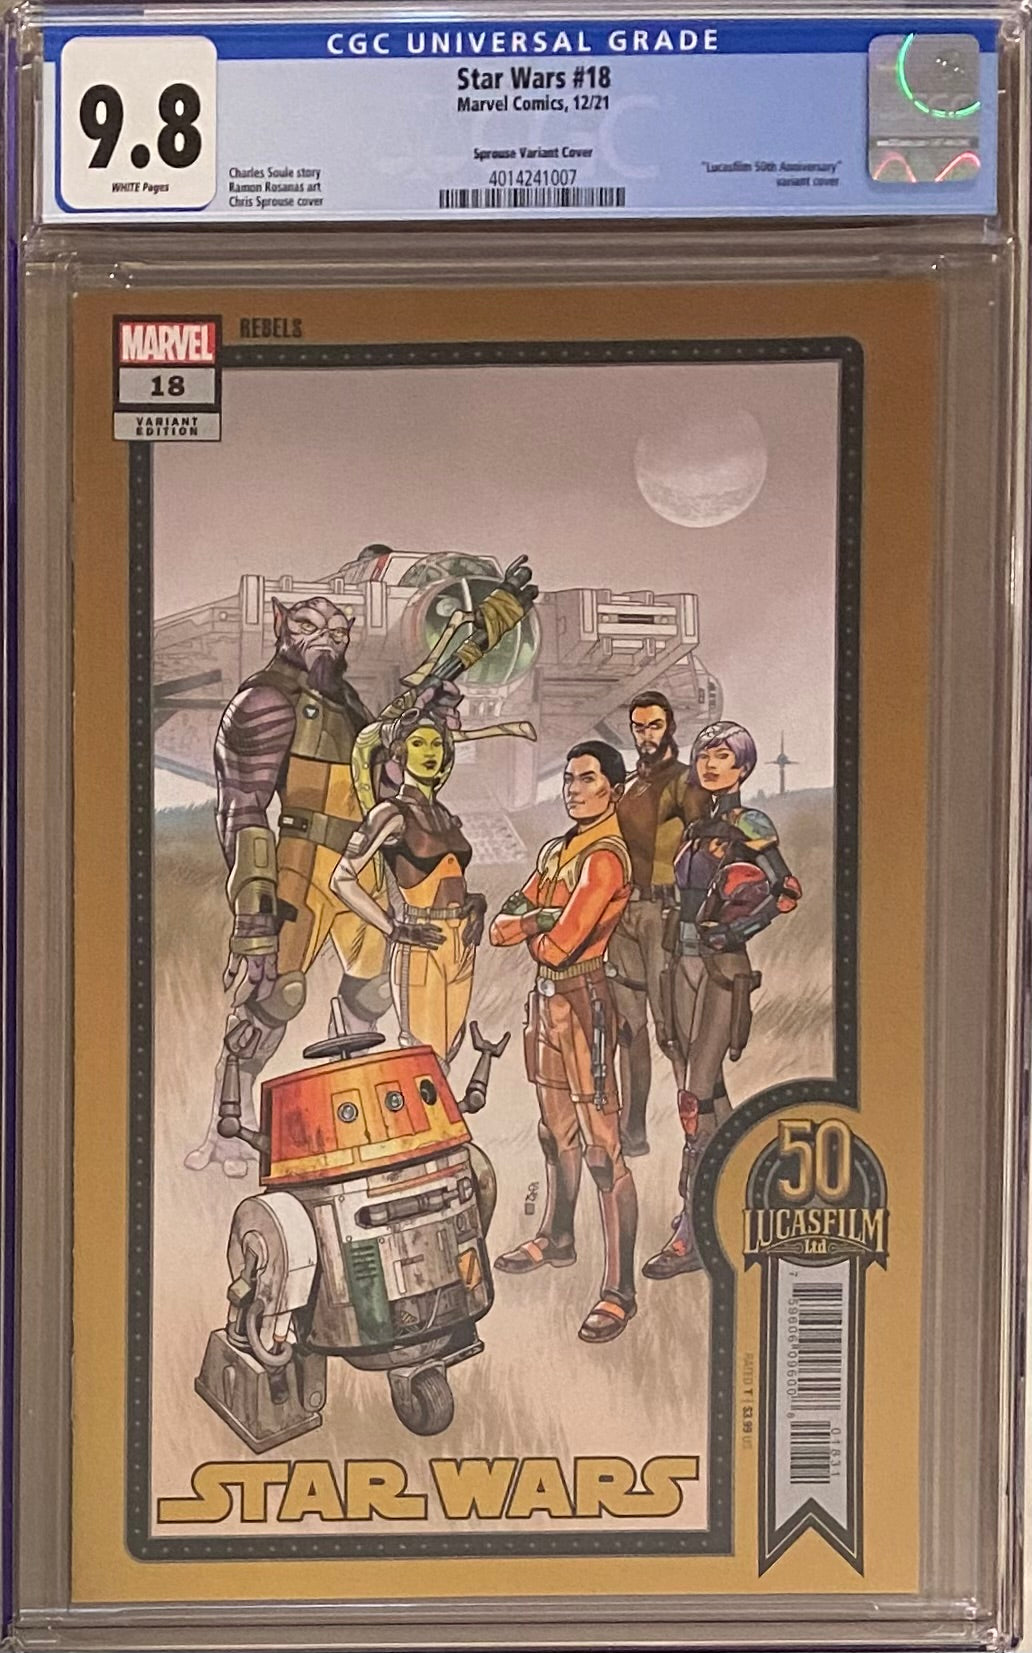 Star Wars #18 Sprouse Variant CGC 9.8 - War of the Bounty Hunters